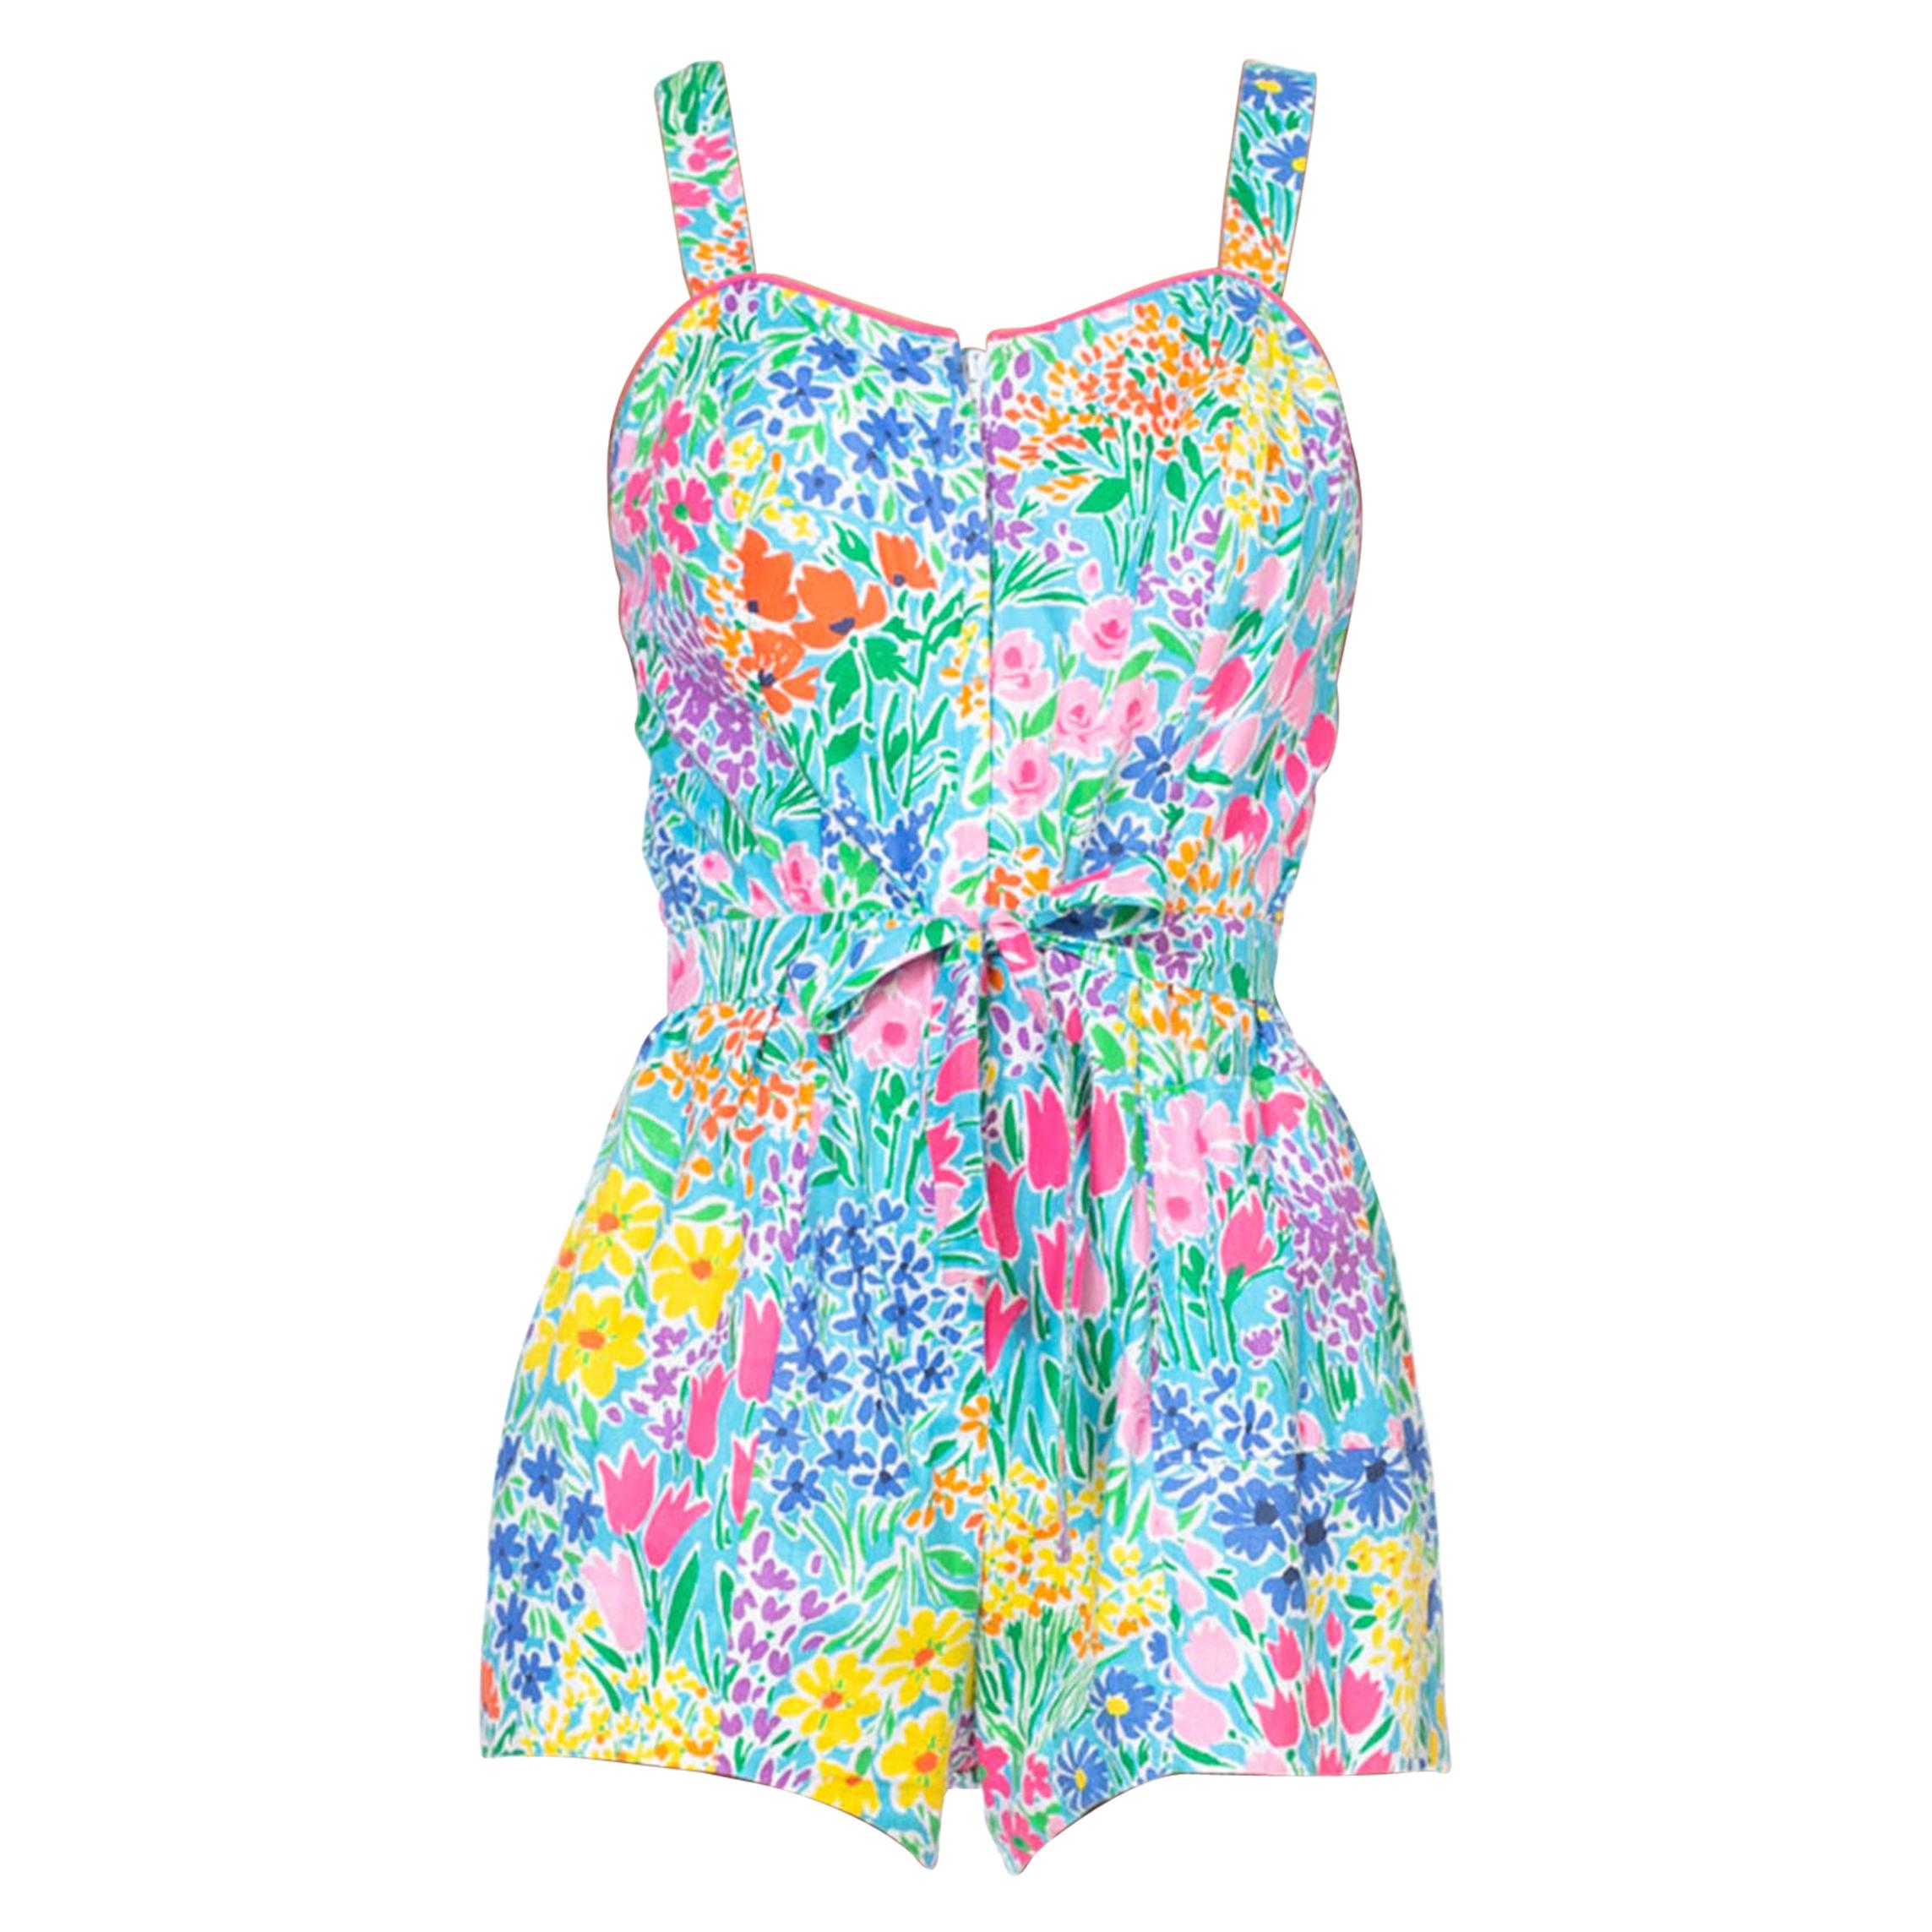 1980S Cotton Lilly P Style Bright Floral Jumpsuit Romper For Sale